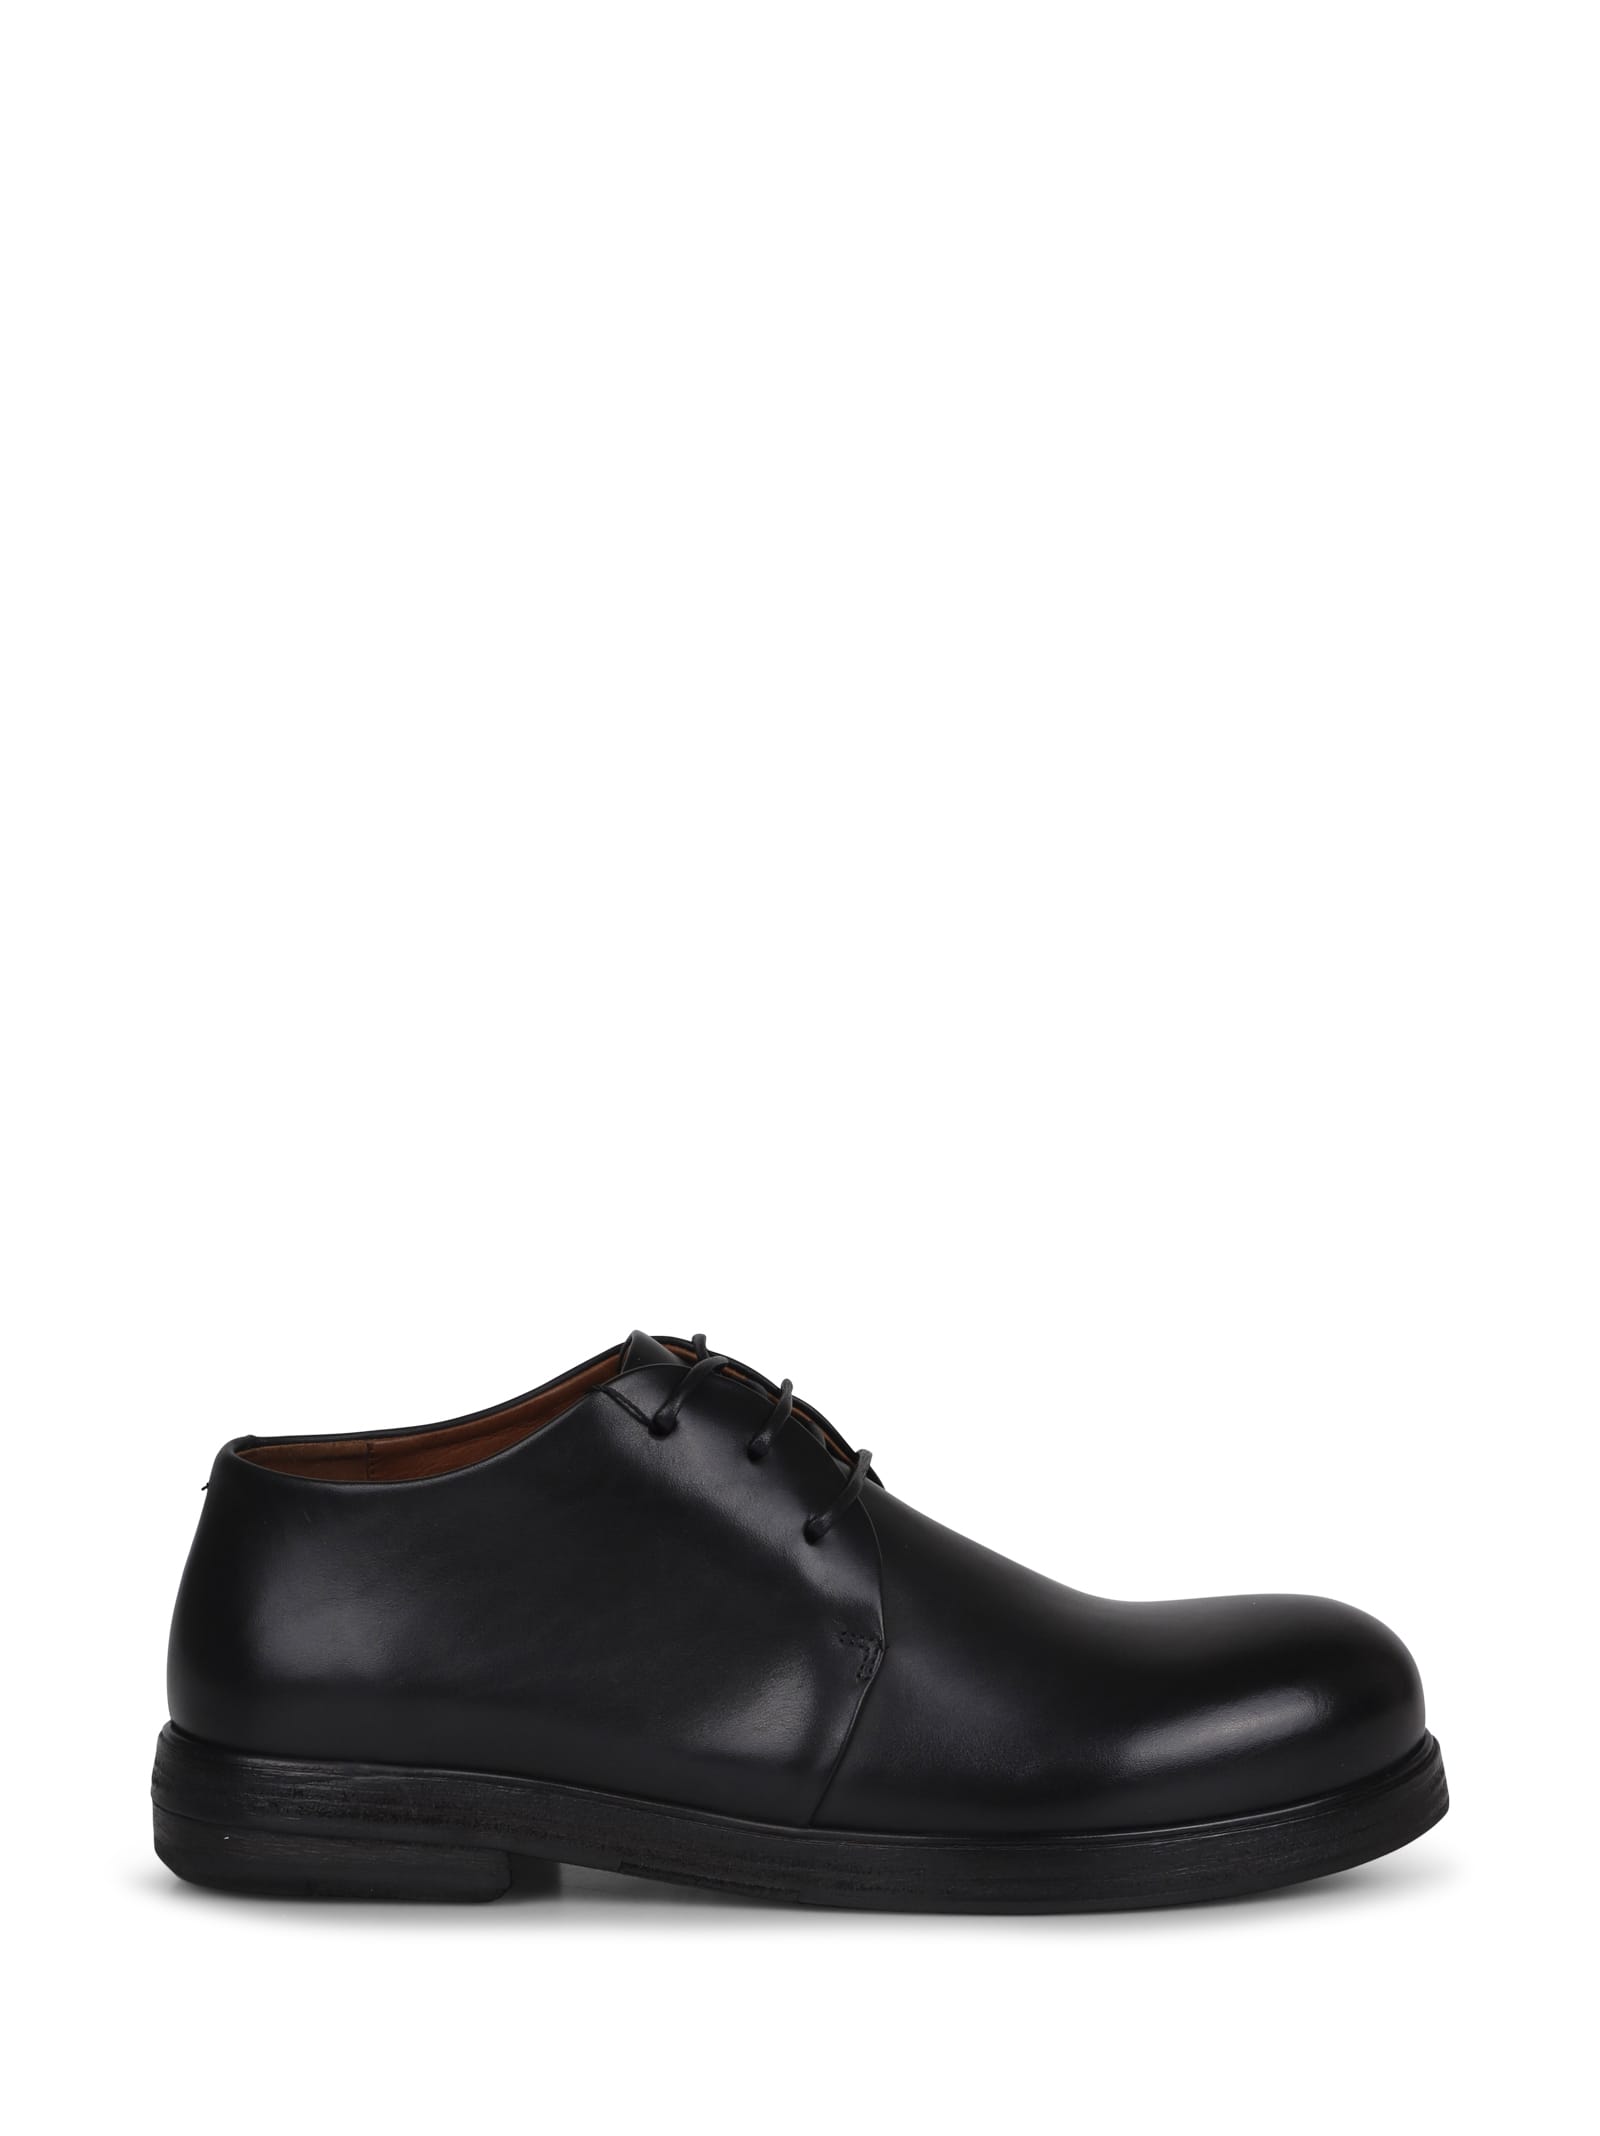 Zucca Leather Oxford Shoes